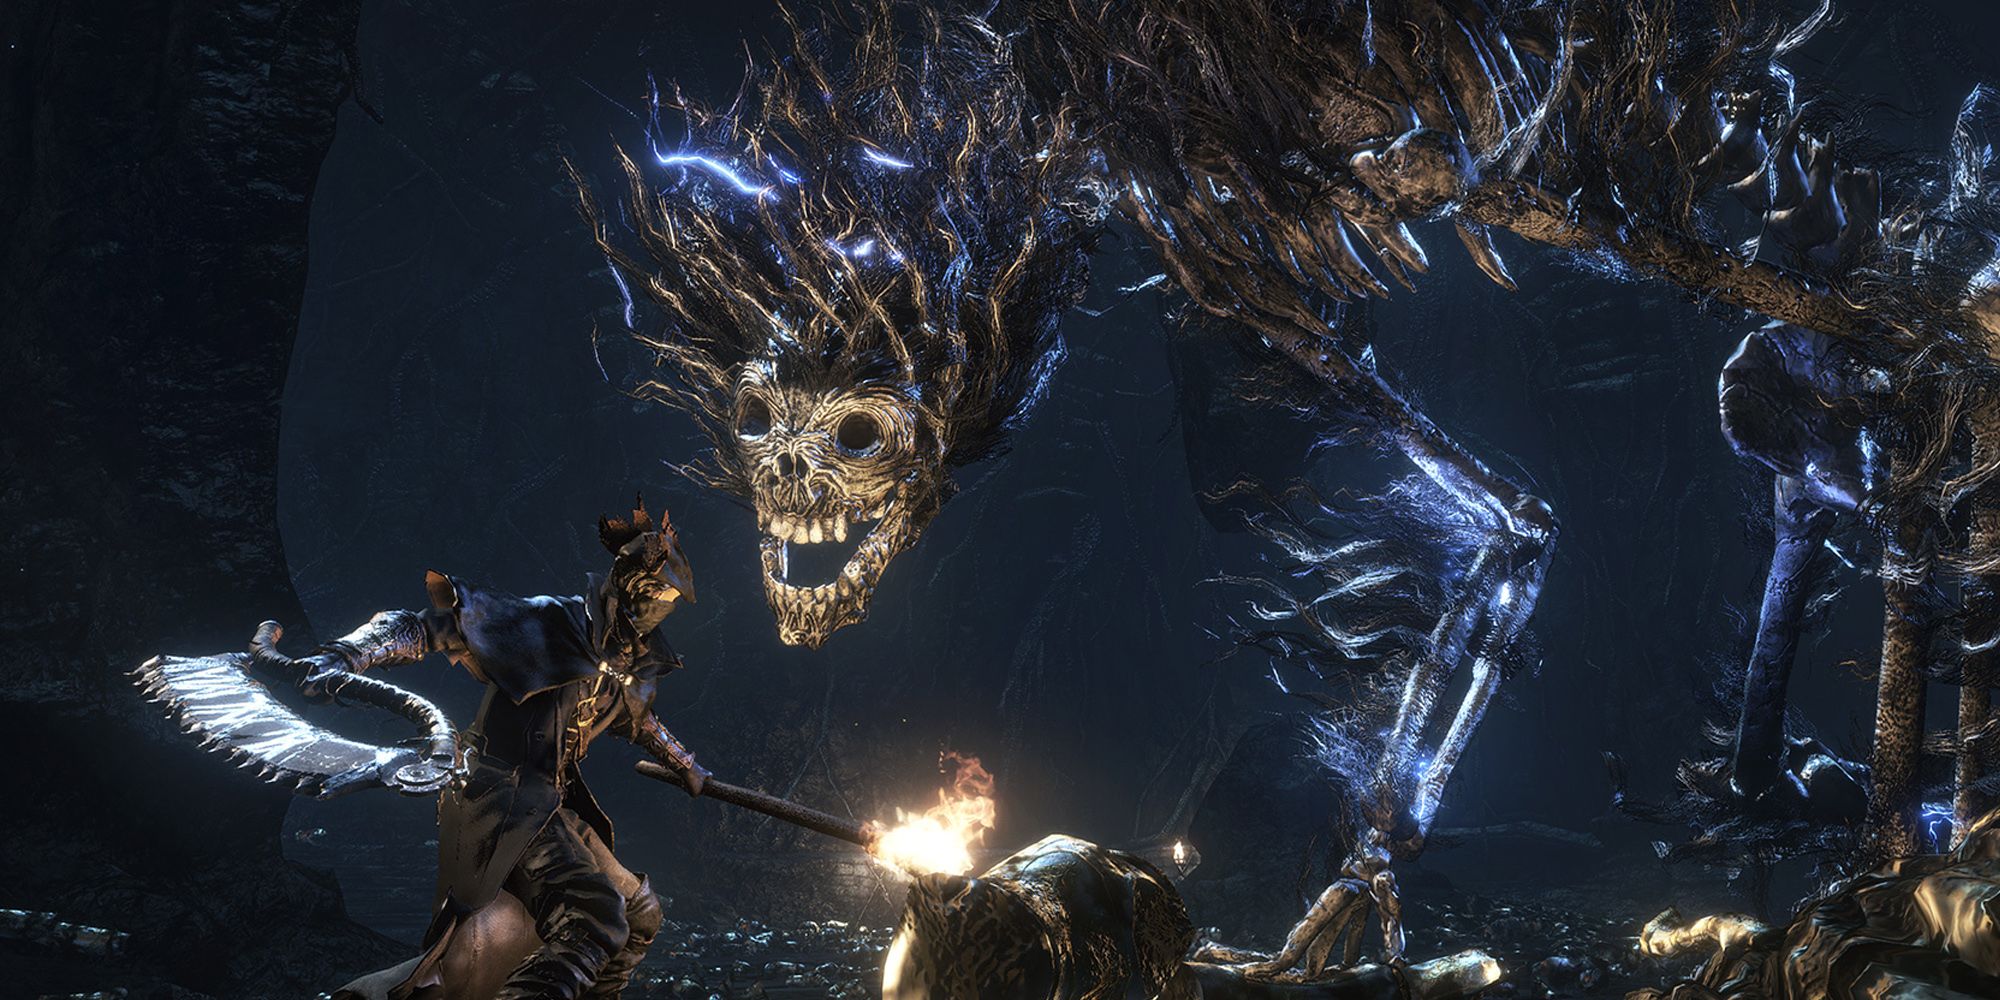 Bloodborne features terrifying enemy designs